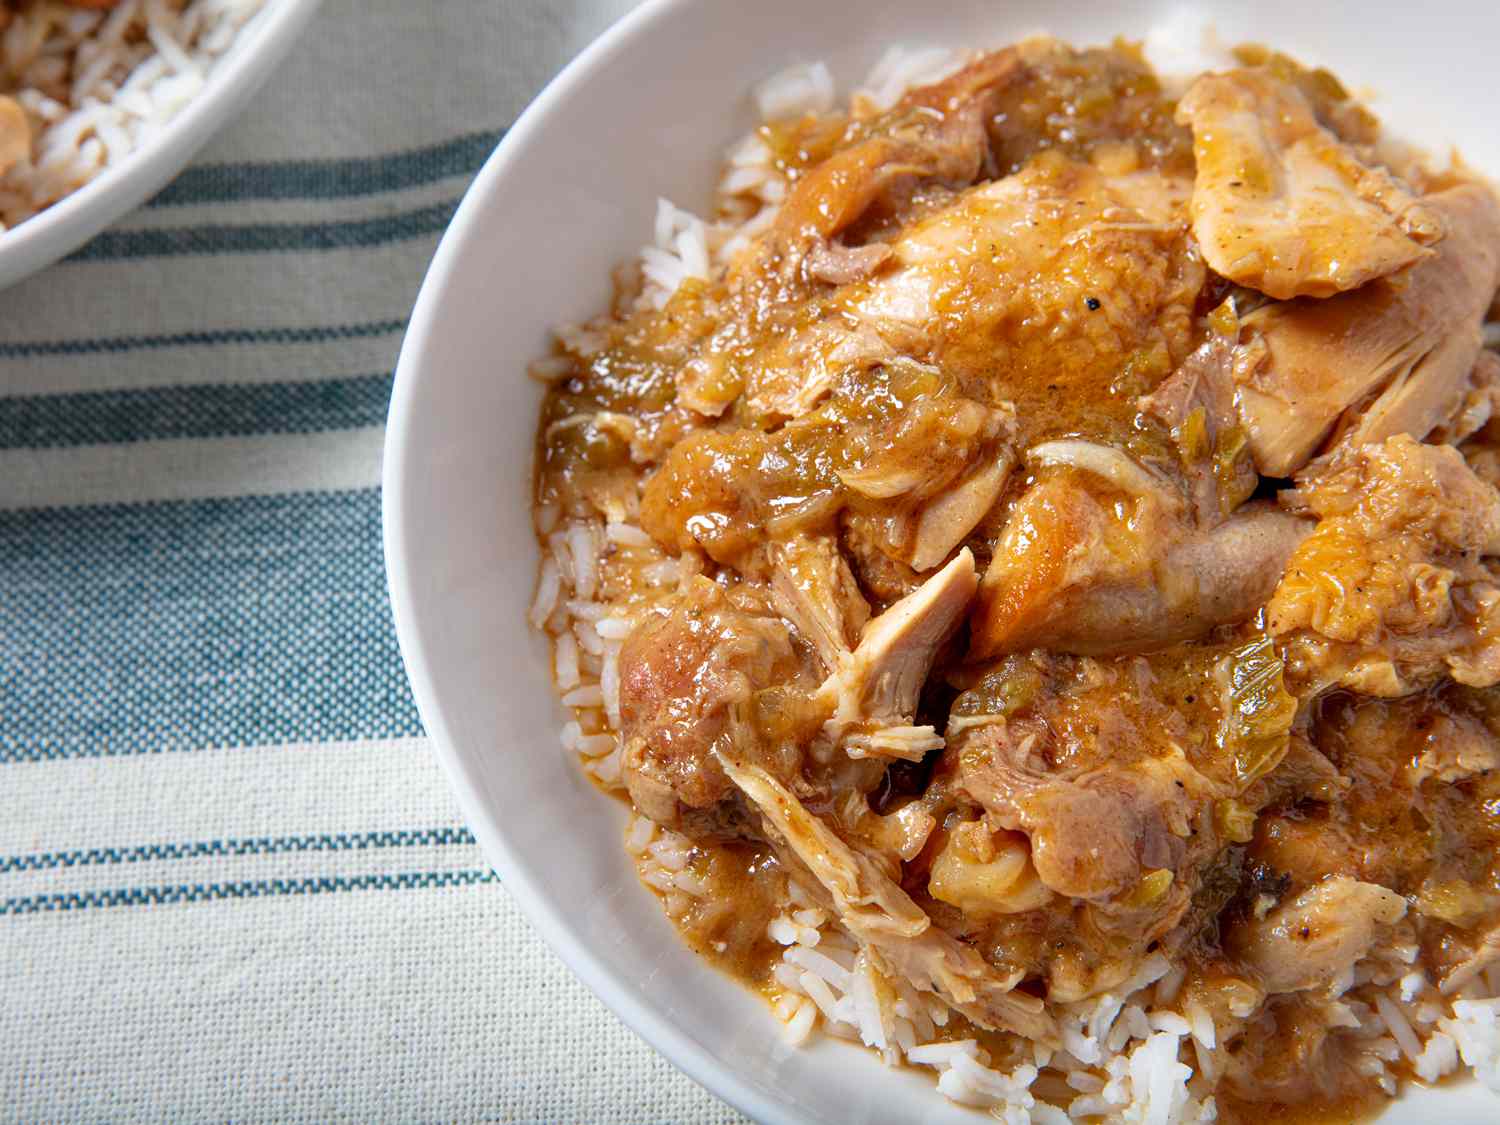 Close up image of lowcounty stew chicken over rice. The food is inside of a white porcelain bowl, placed on a textured and dyed dishcloth.